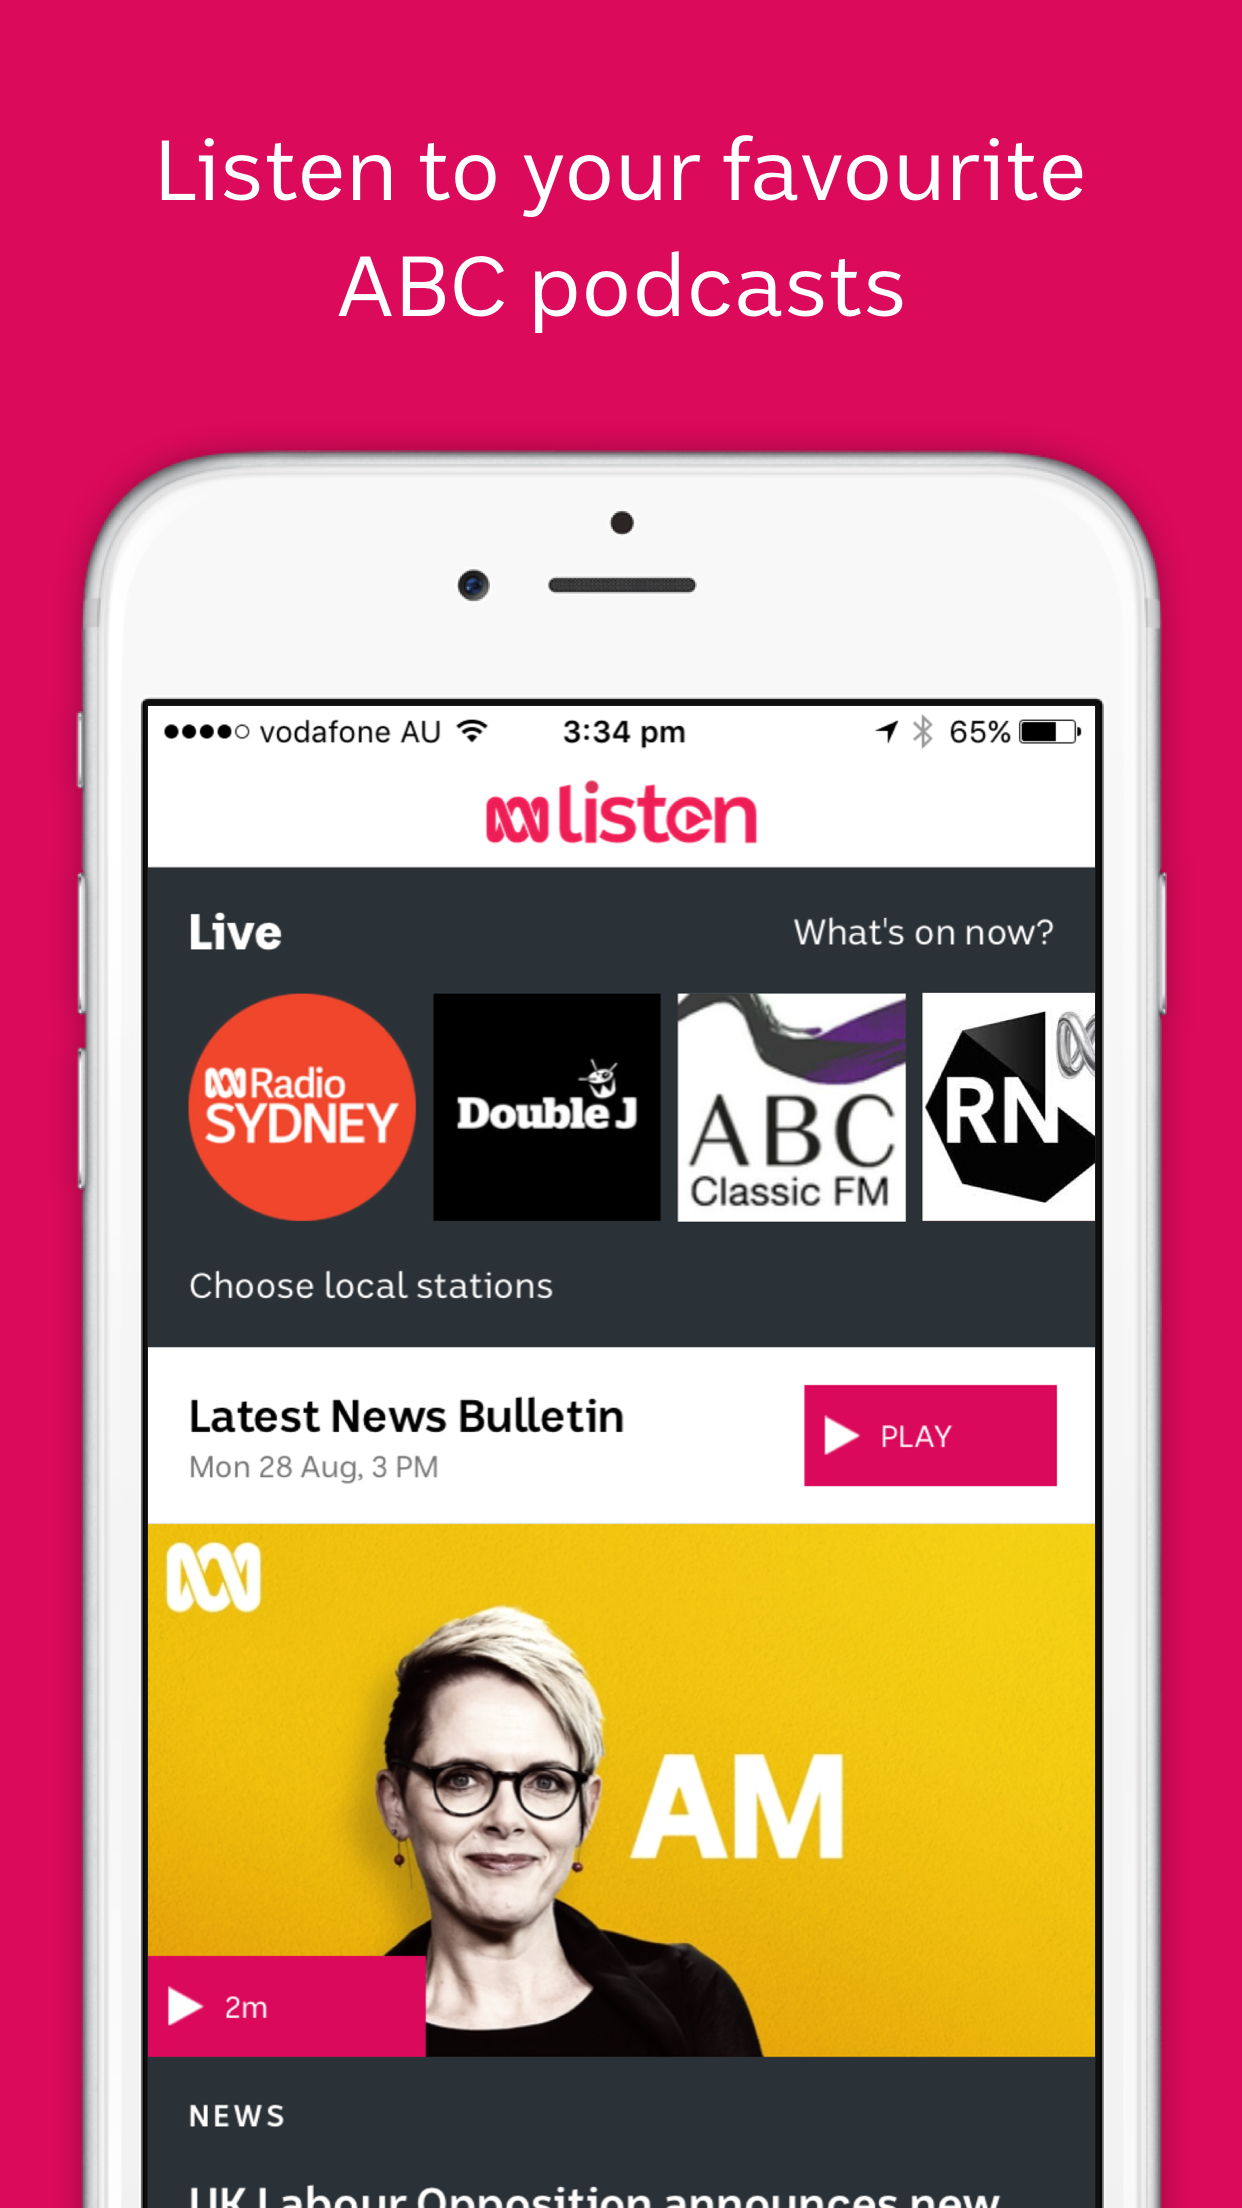 Listen to your favourite ABC podcasts